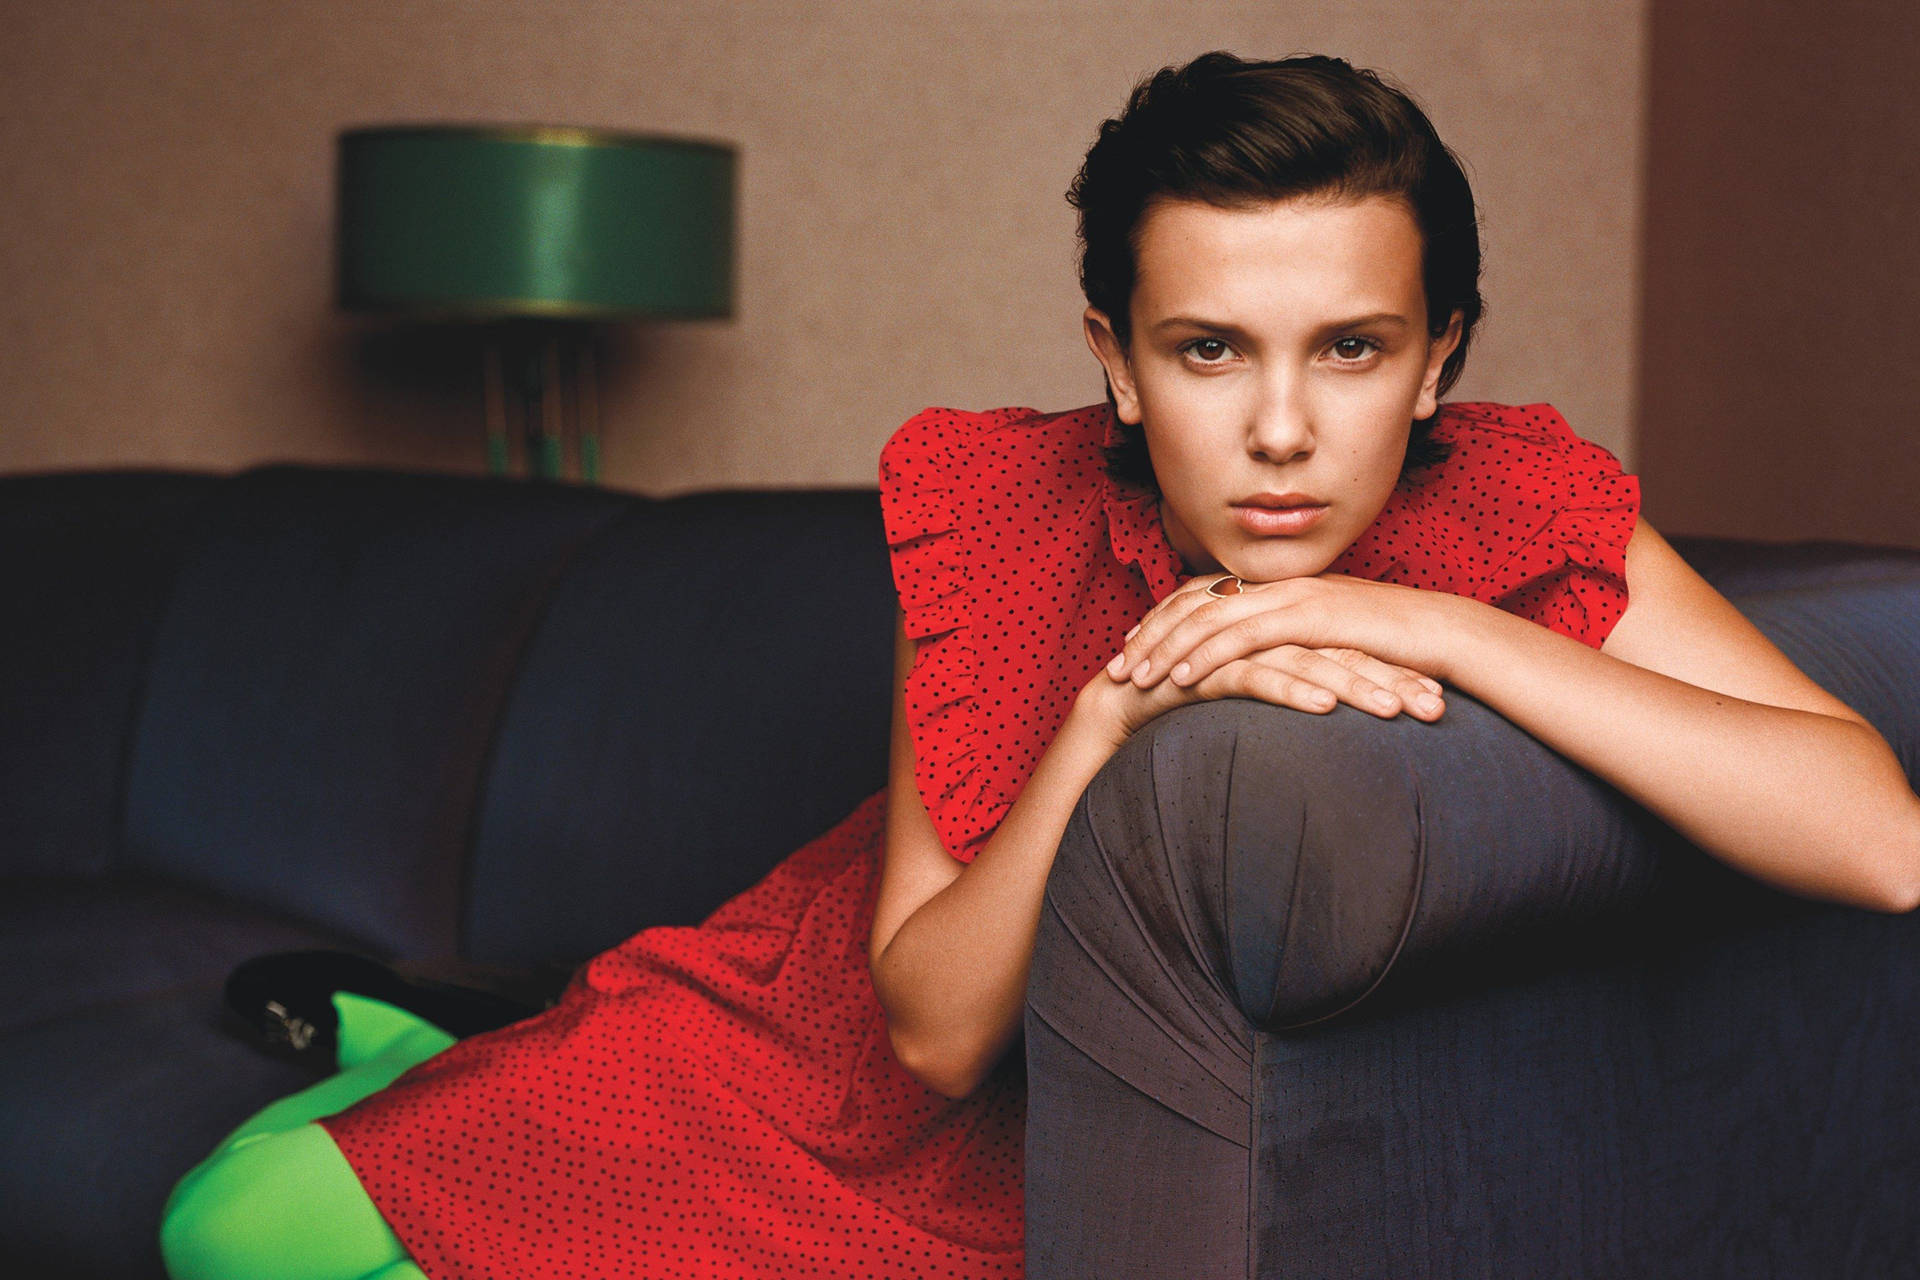 Millie Bobby Brown Looking Regal In A Red Dress Background